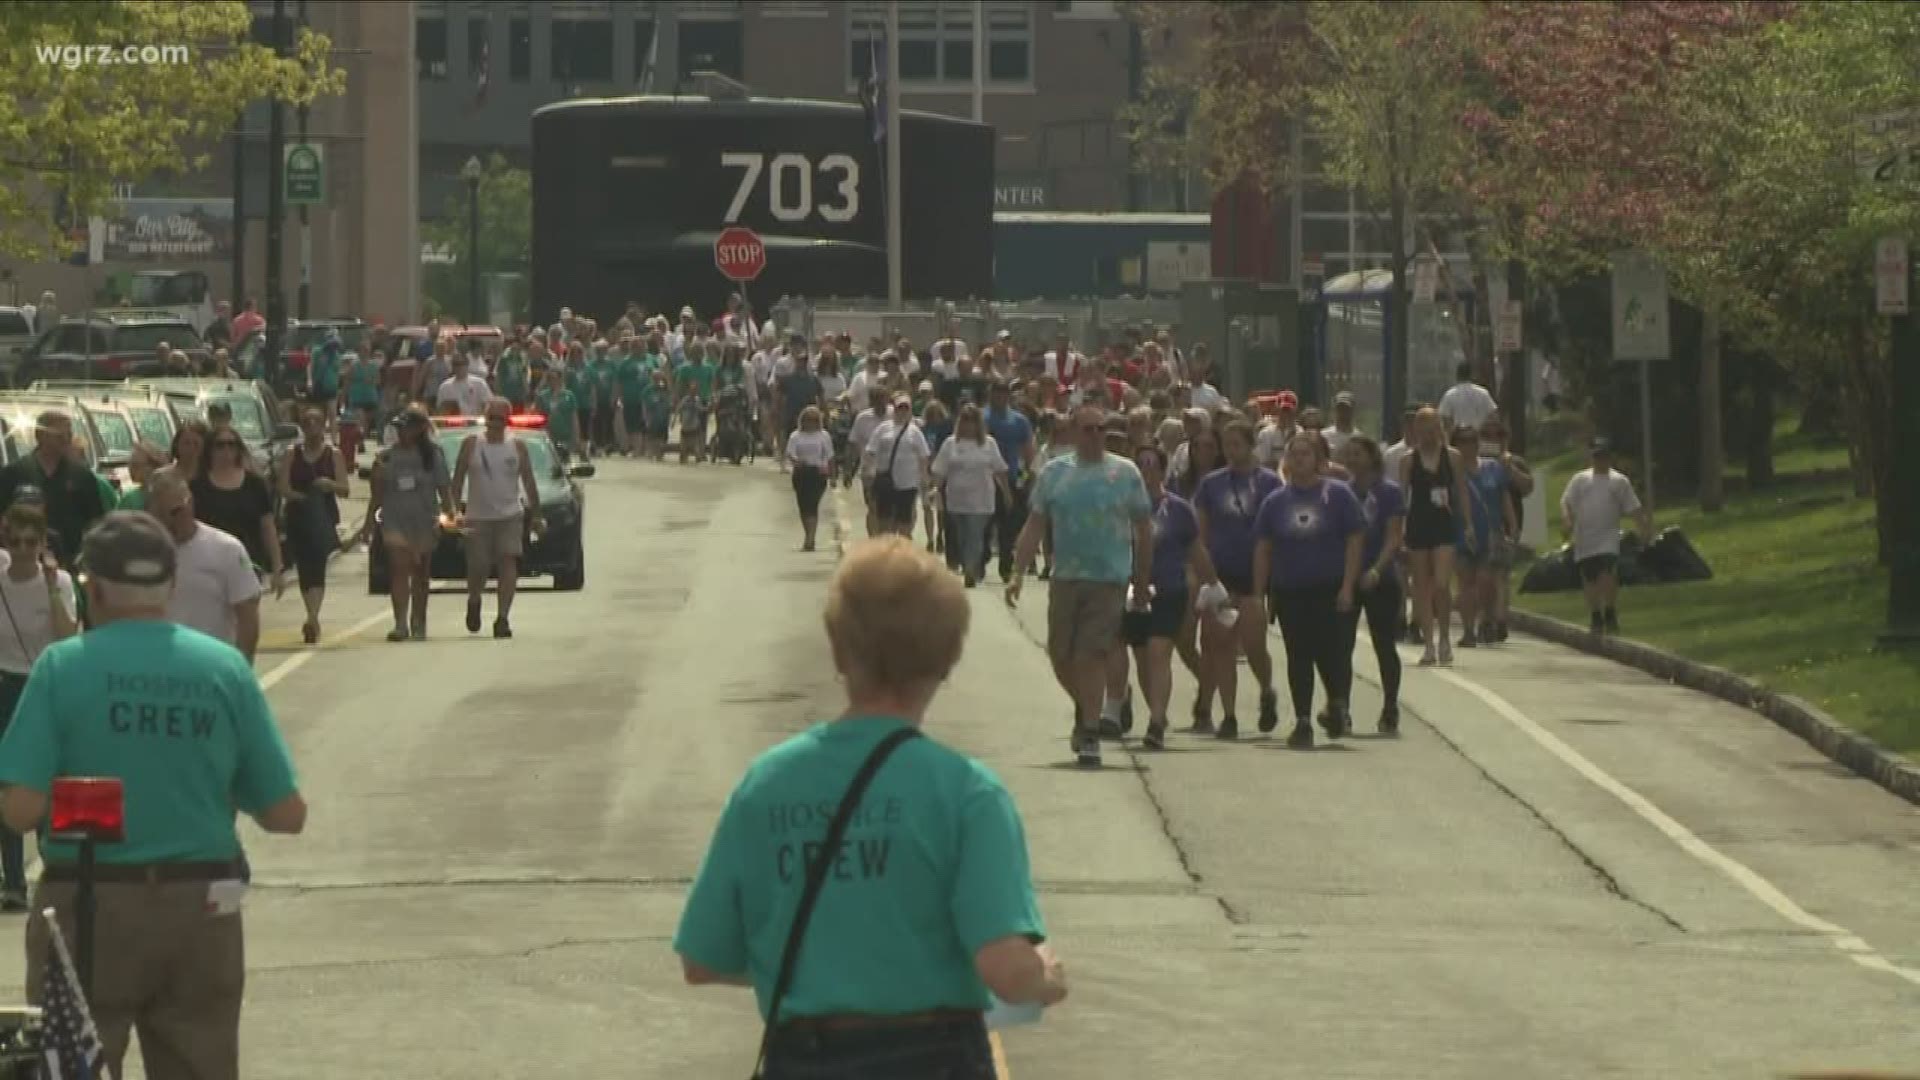 The annual walk at Canalside was set for May 17, but was cancelled due to the coronavirus pandemic. Organizers started a new virtual campaign.